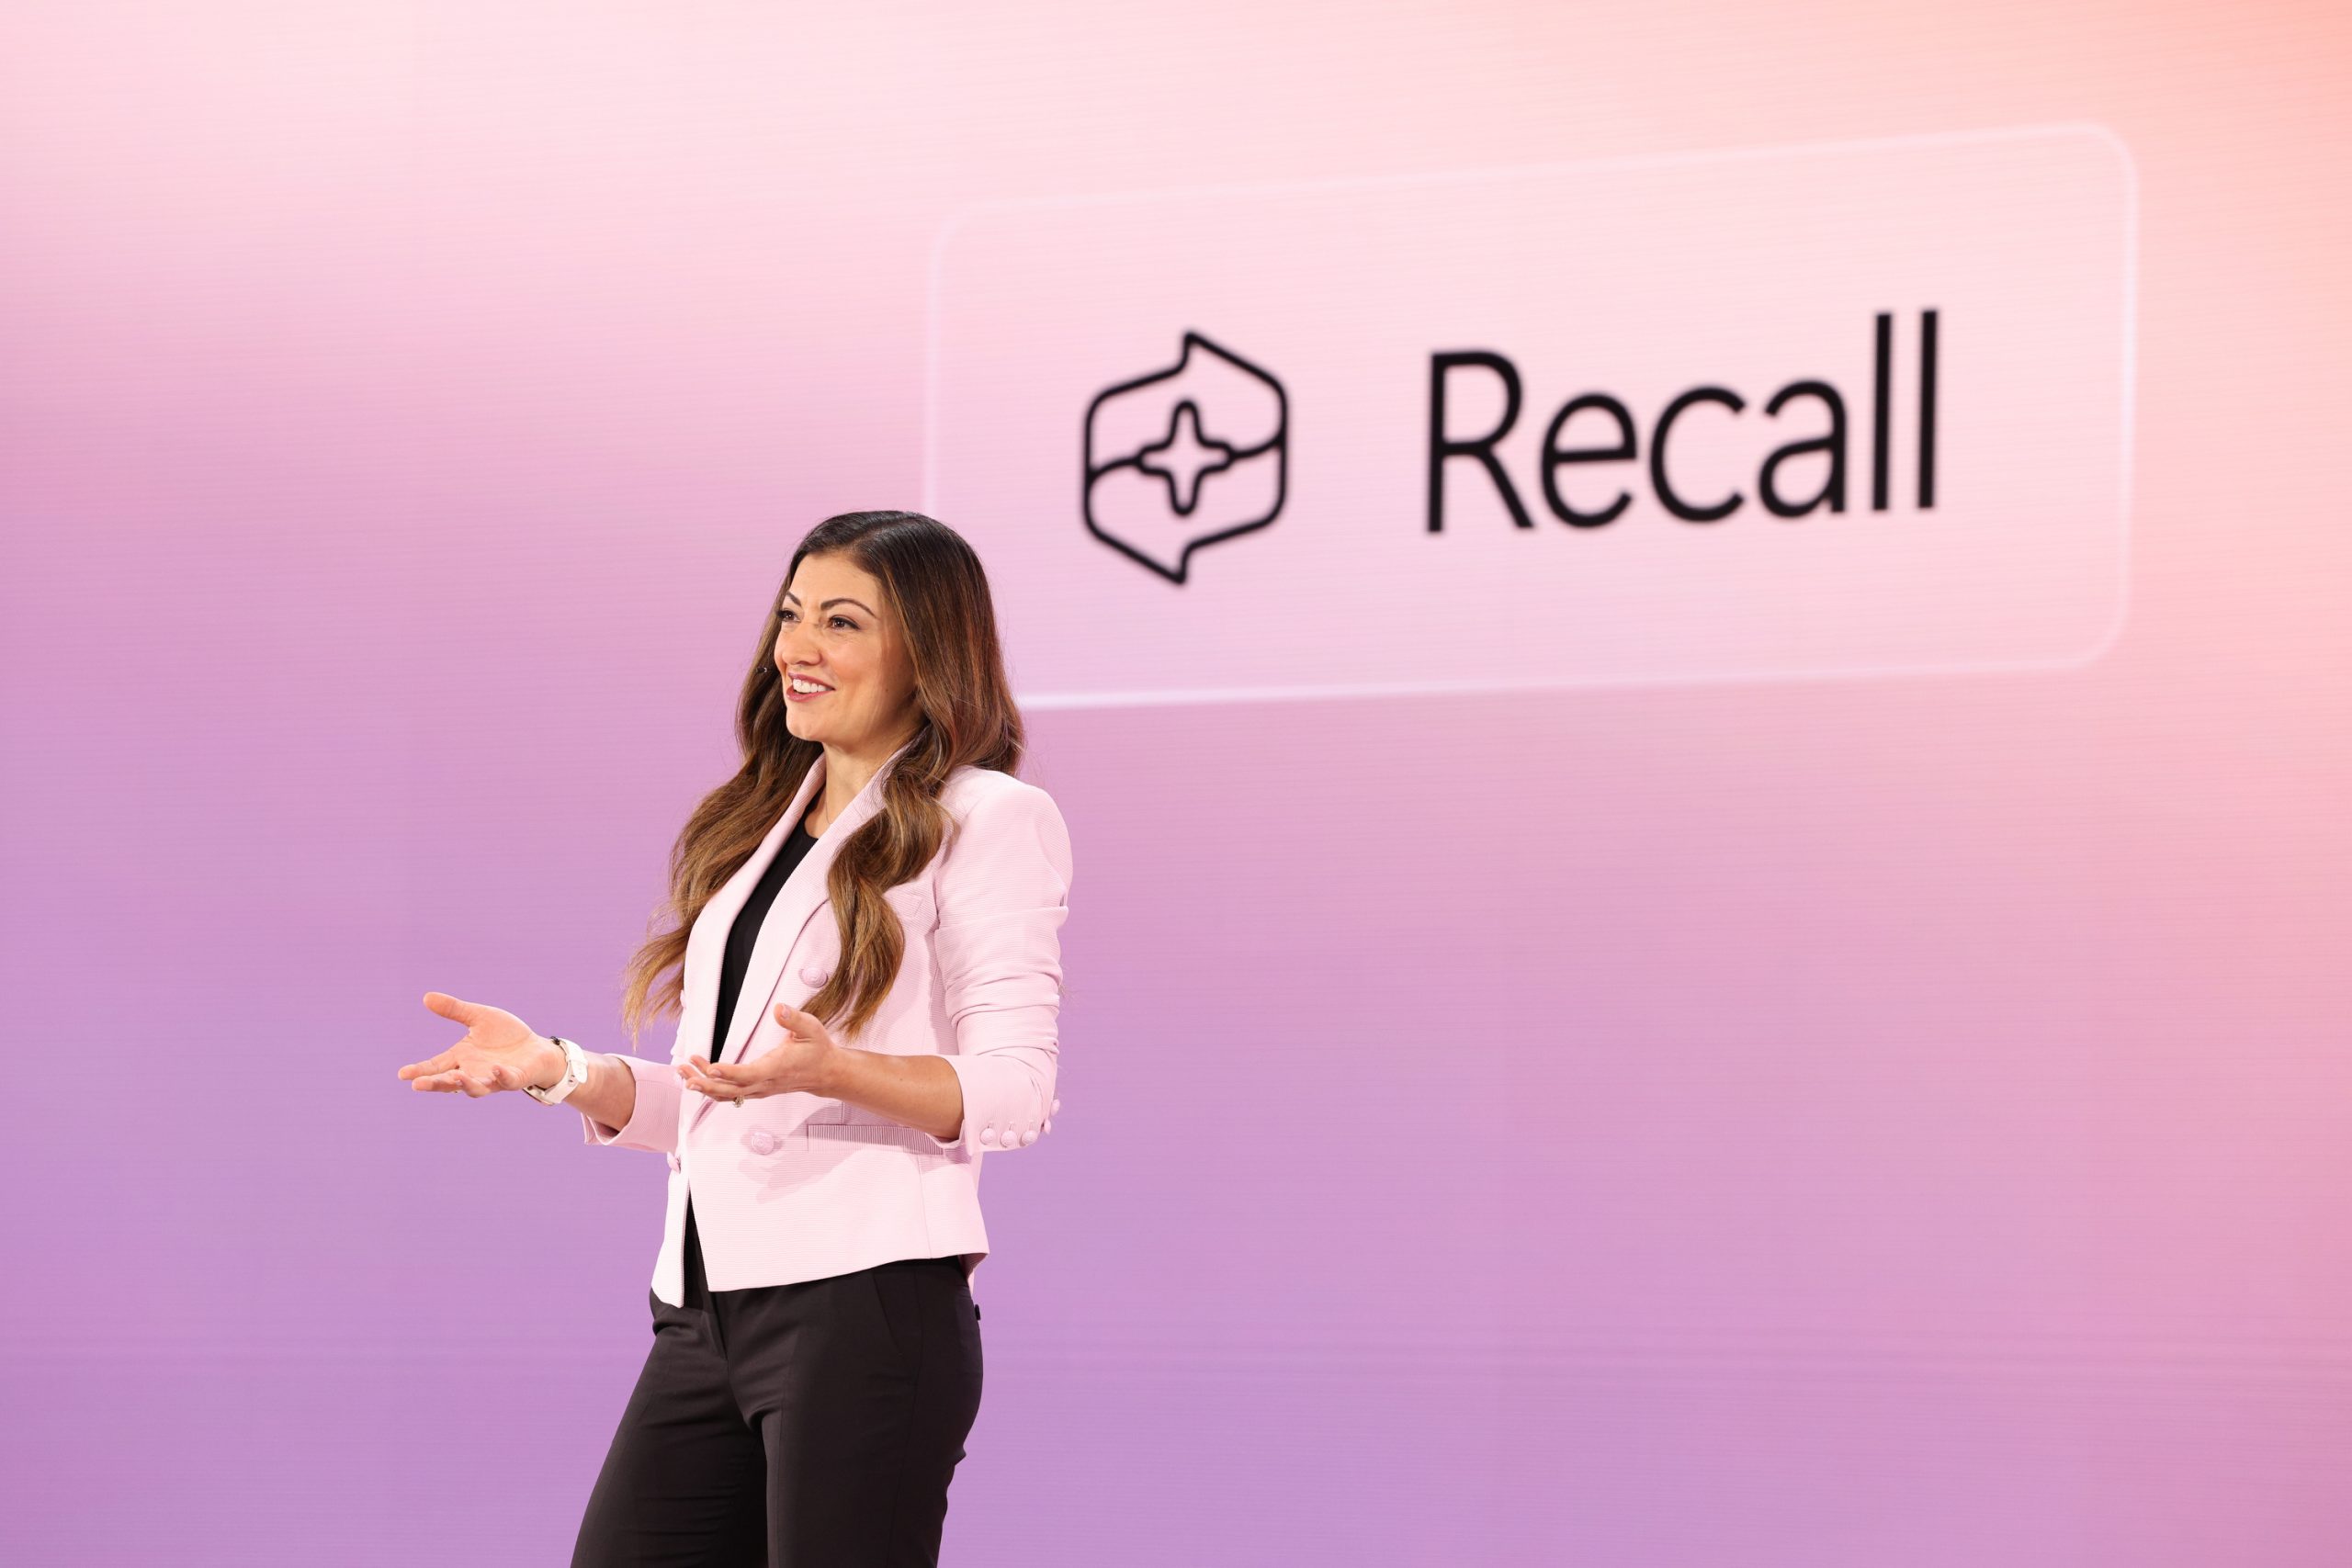 A woman standing on stage in front of an audience, with the Recall word and logo on the screen behind her